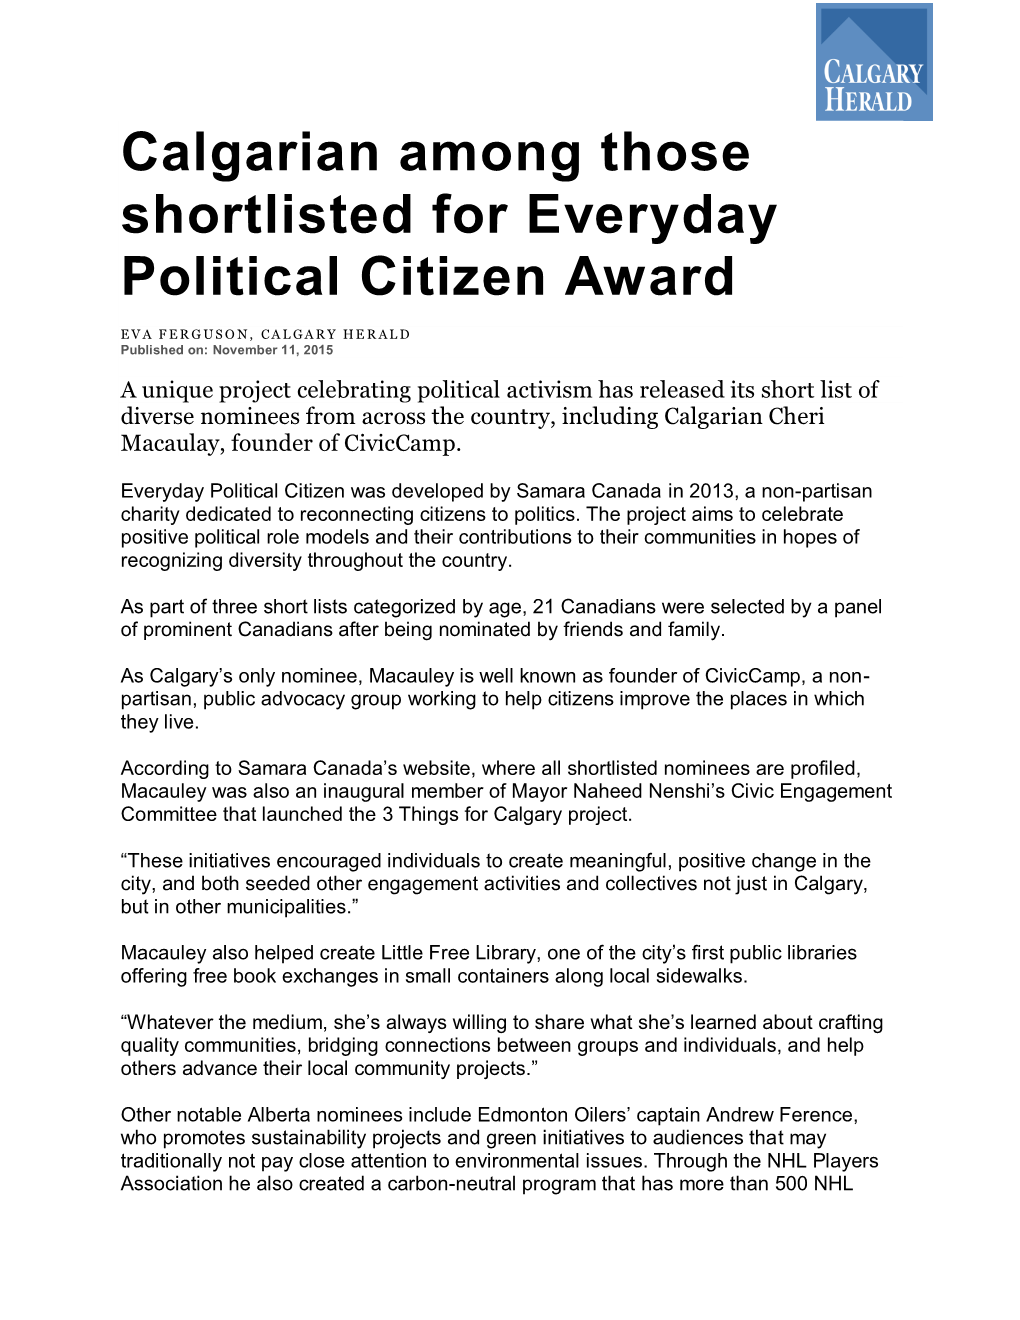 Calgarian Among Those Shortlisted for Everyday Political Citizen Award